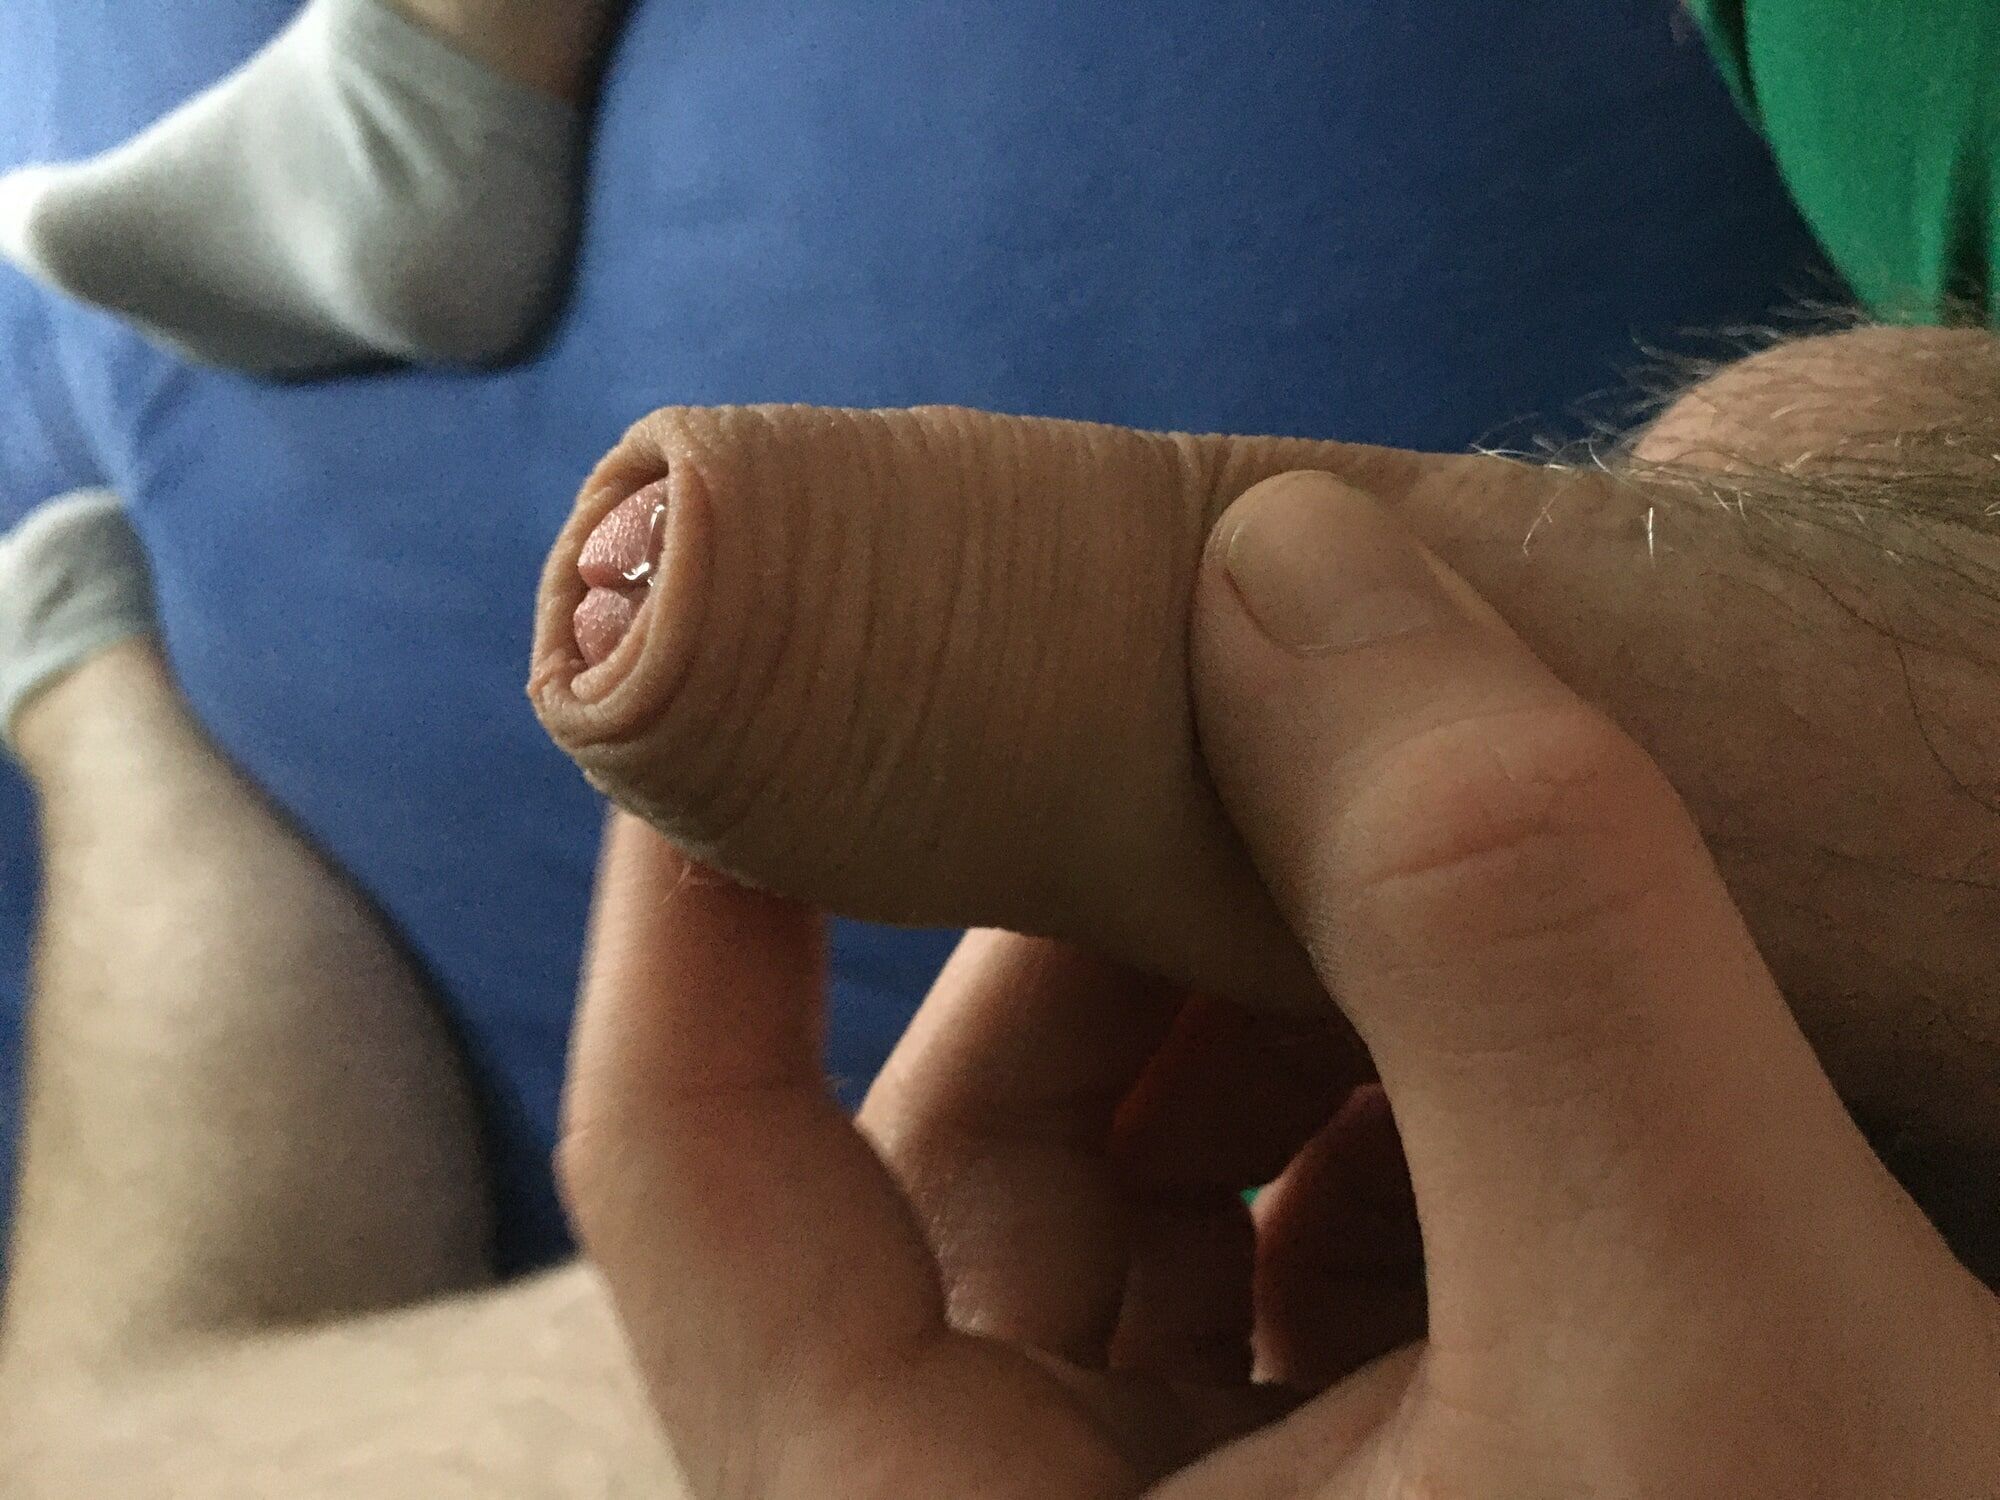 Hairy Dick And Balls Cockhead Foreskin Play With Pre- Cum #7